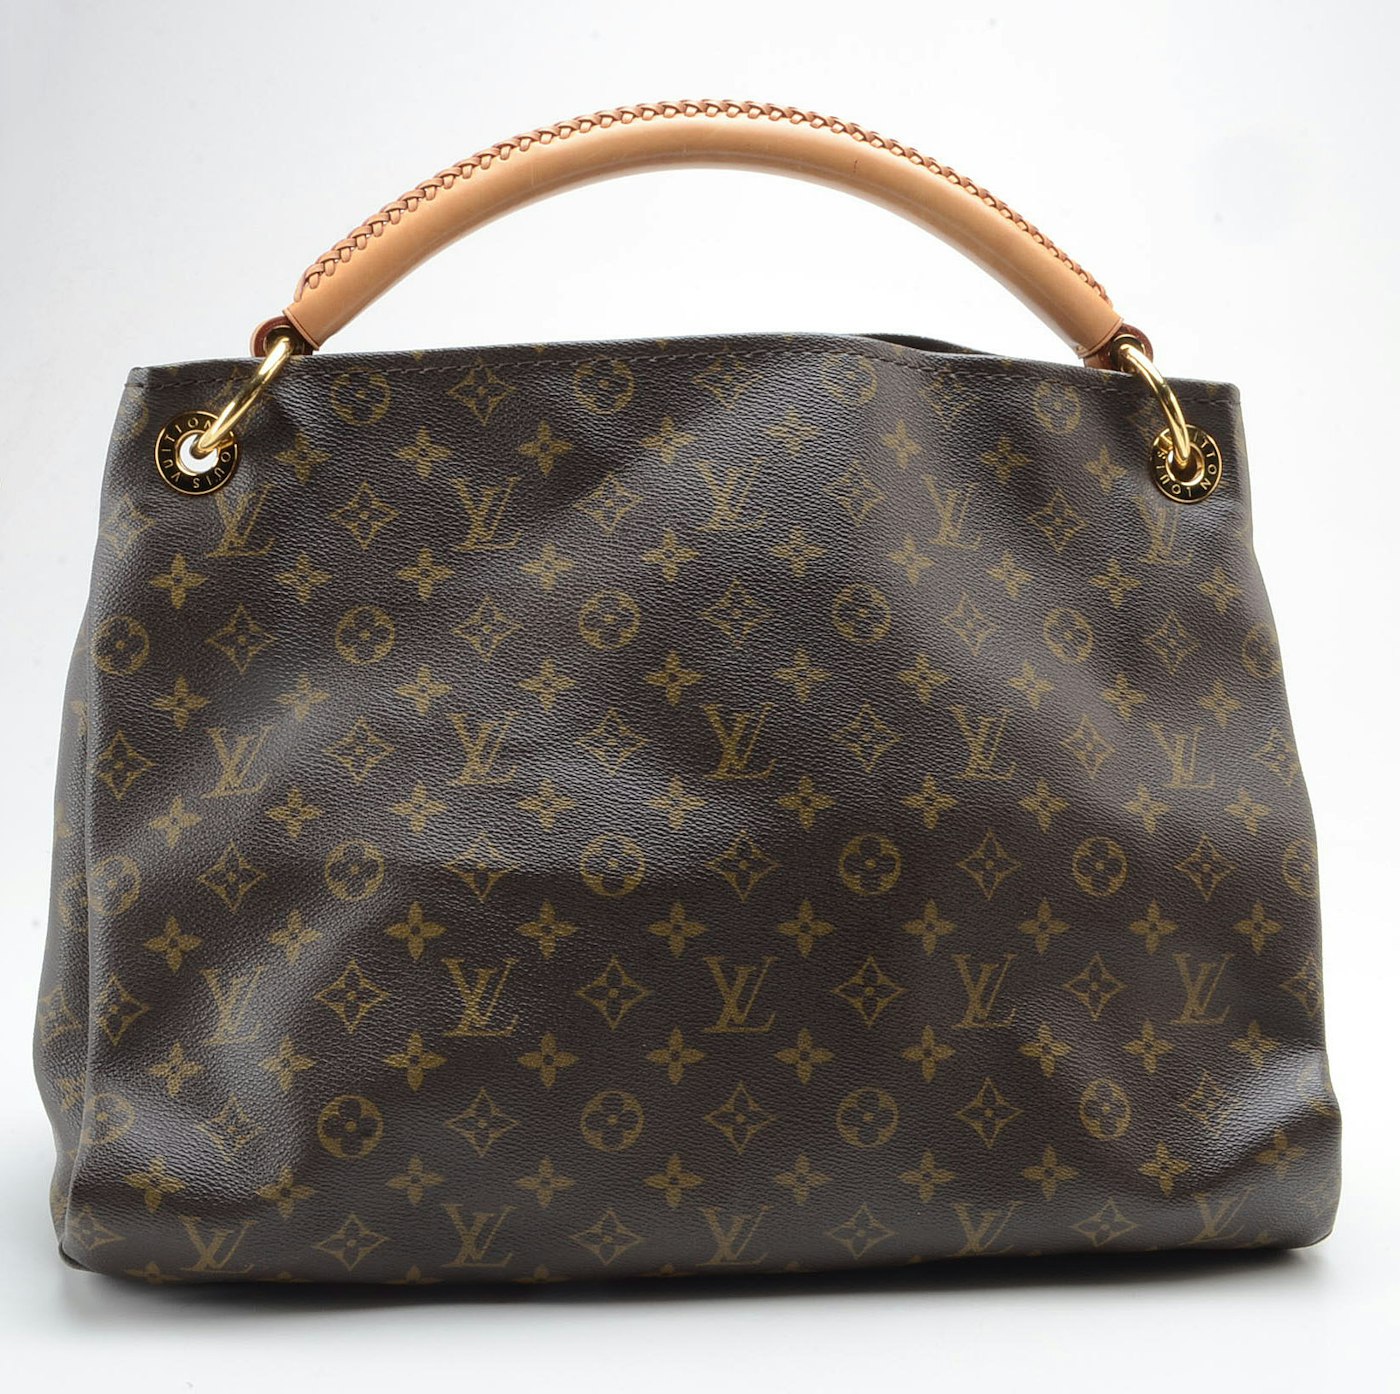 Expert's Guide To Buying An Authentic Louis Vuitton Handbag